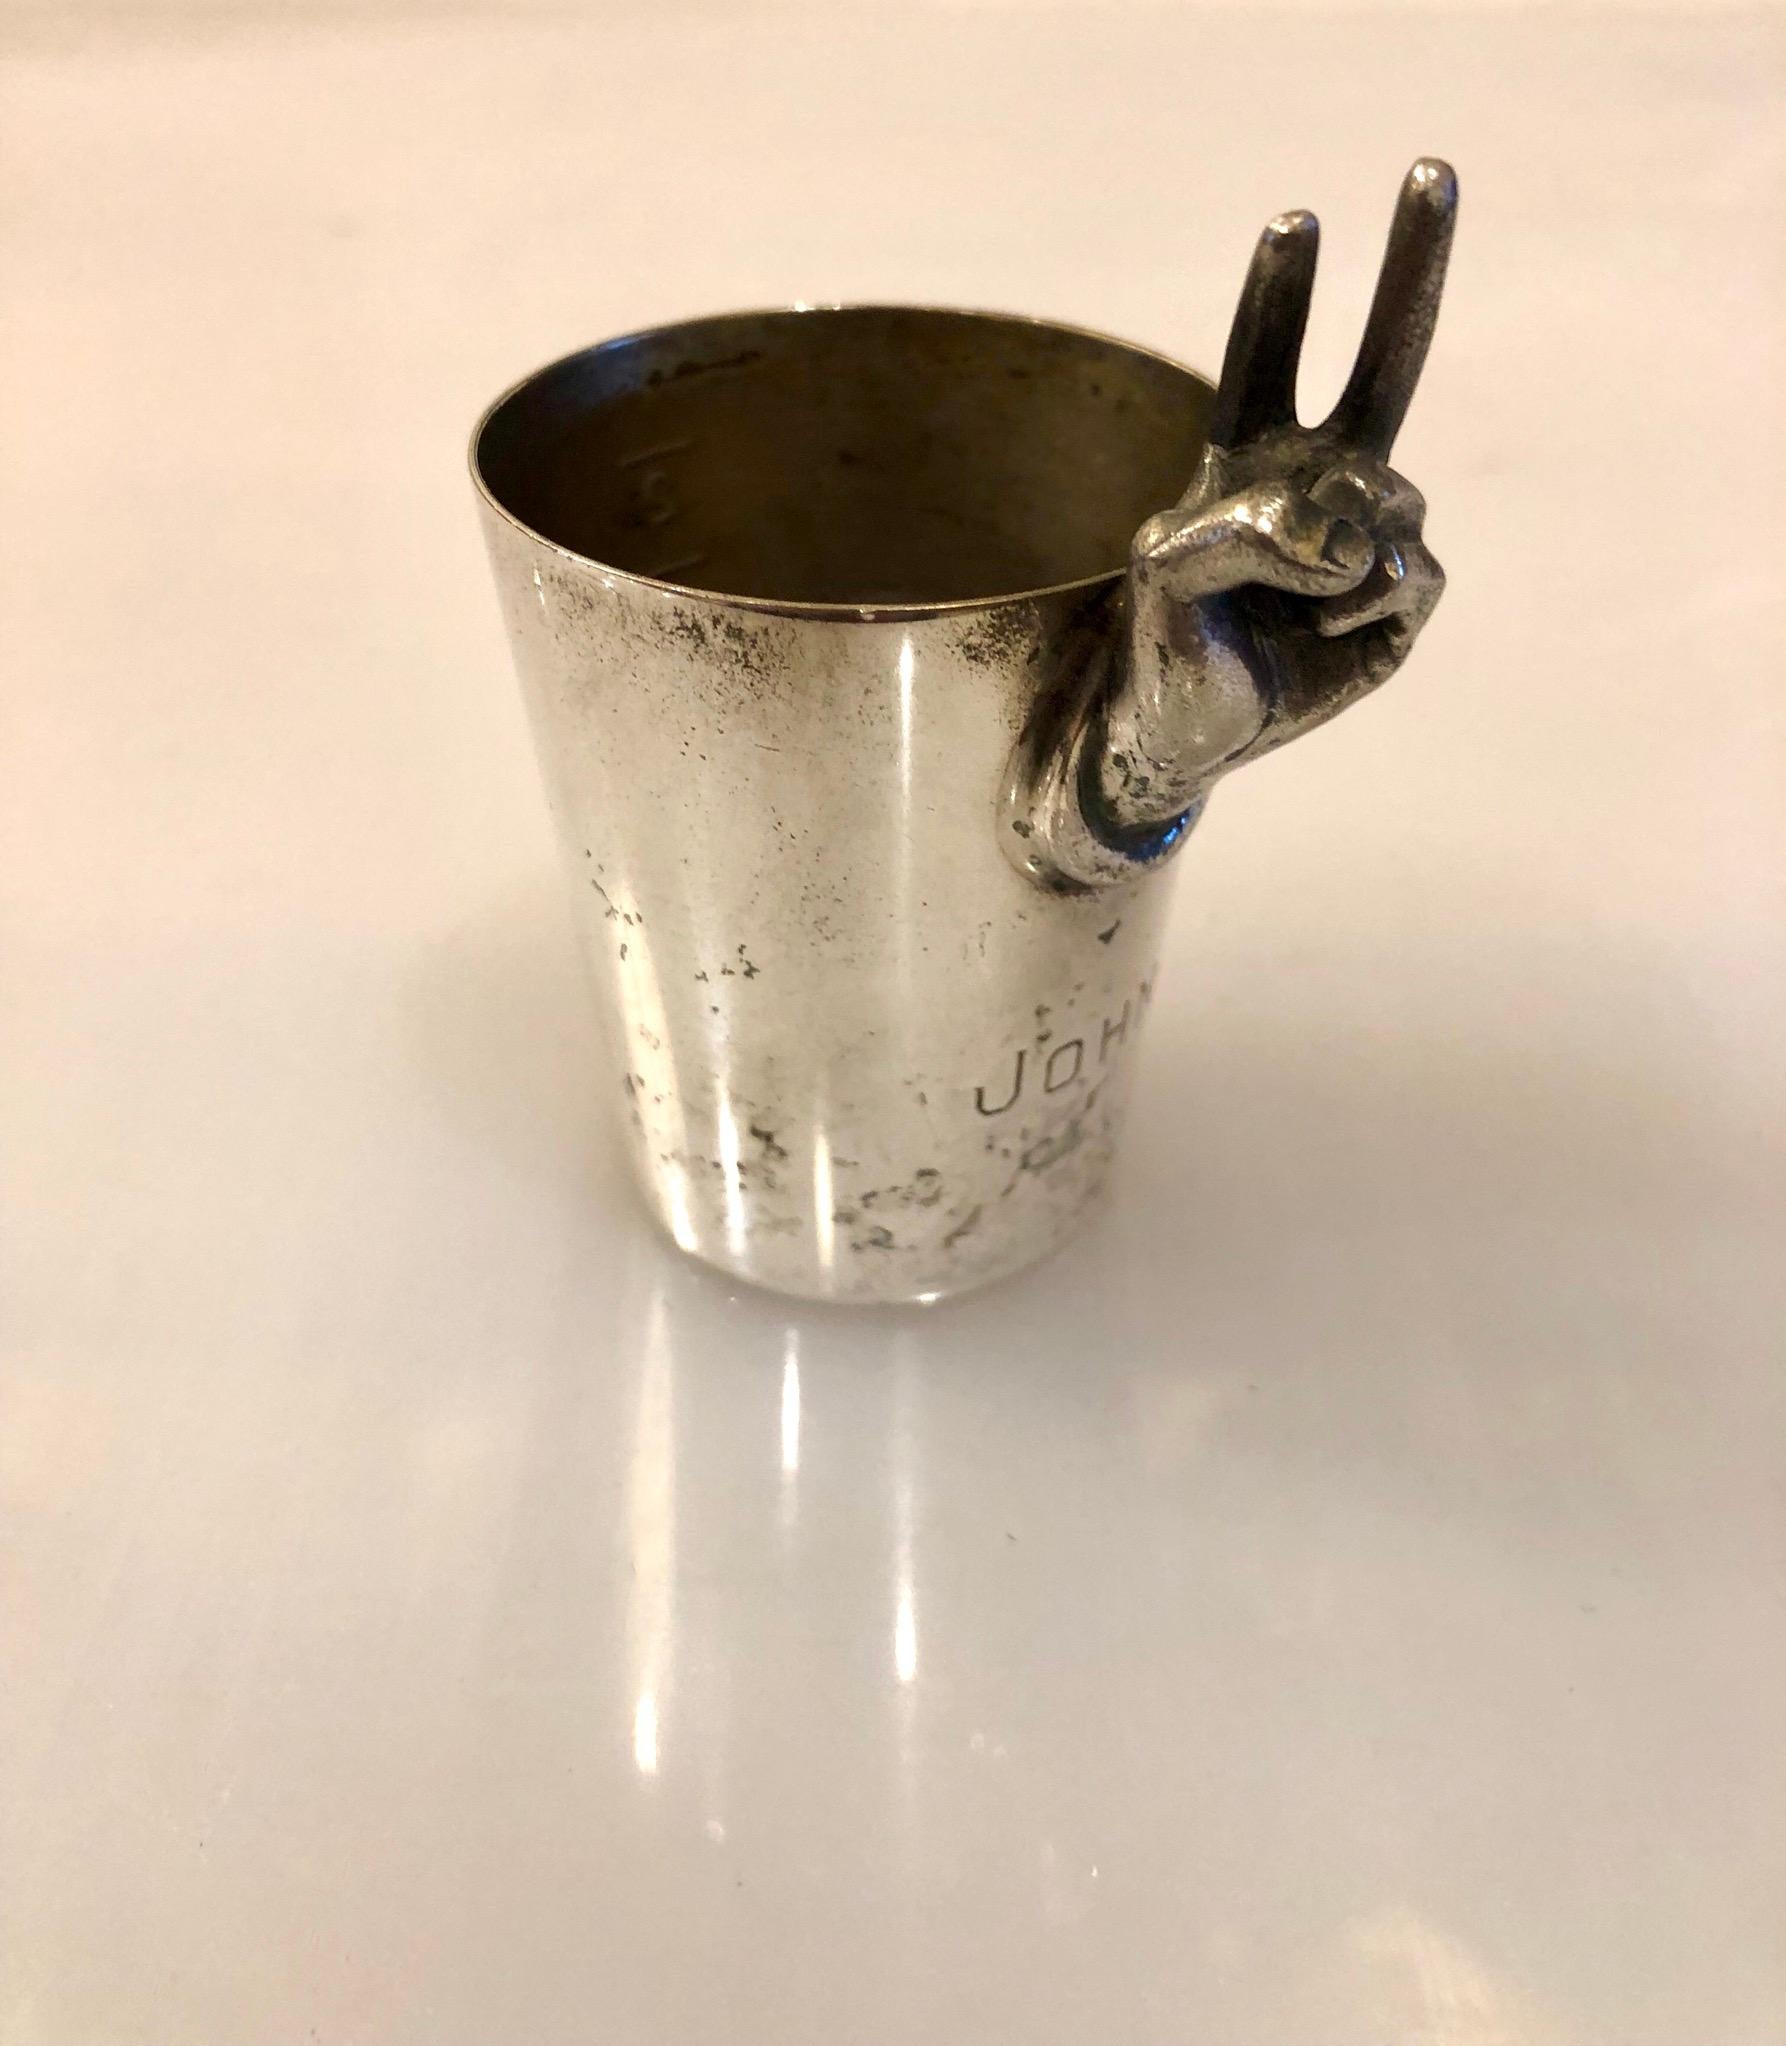 Unique polished silver plate shot cup with peace sign, bridal gift signed and dated 1964 and stamped Jhon in the front, manufactured by Napier.